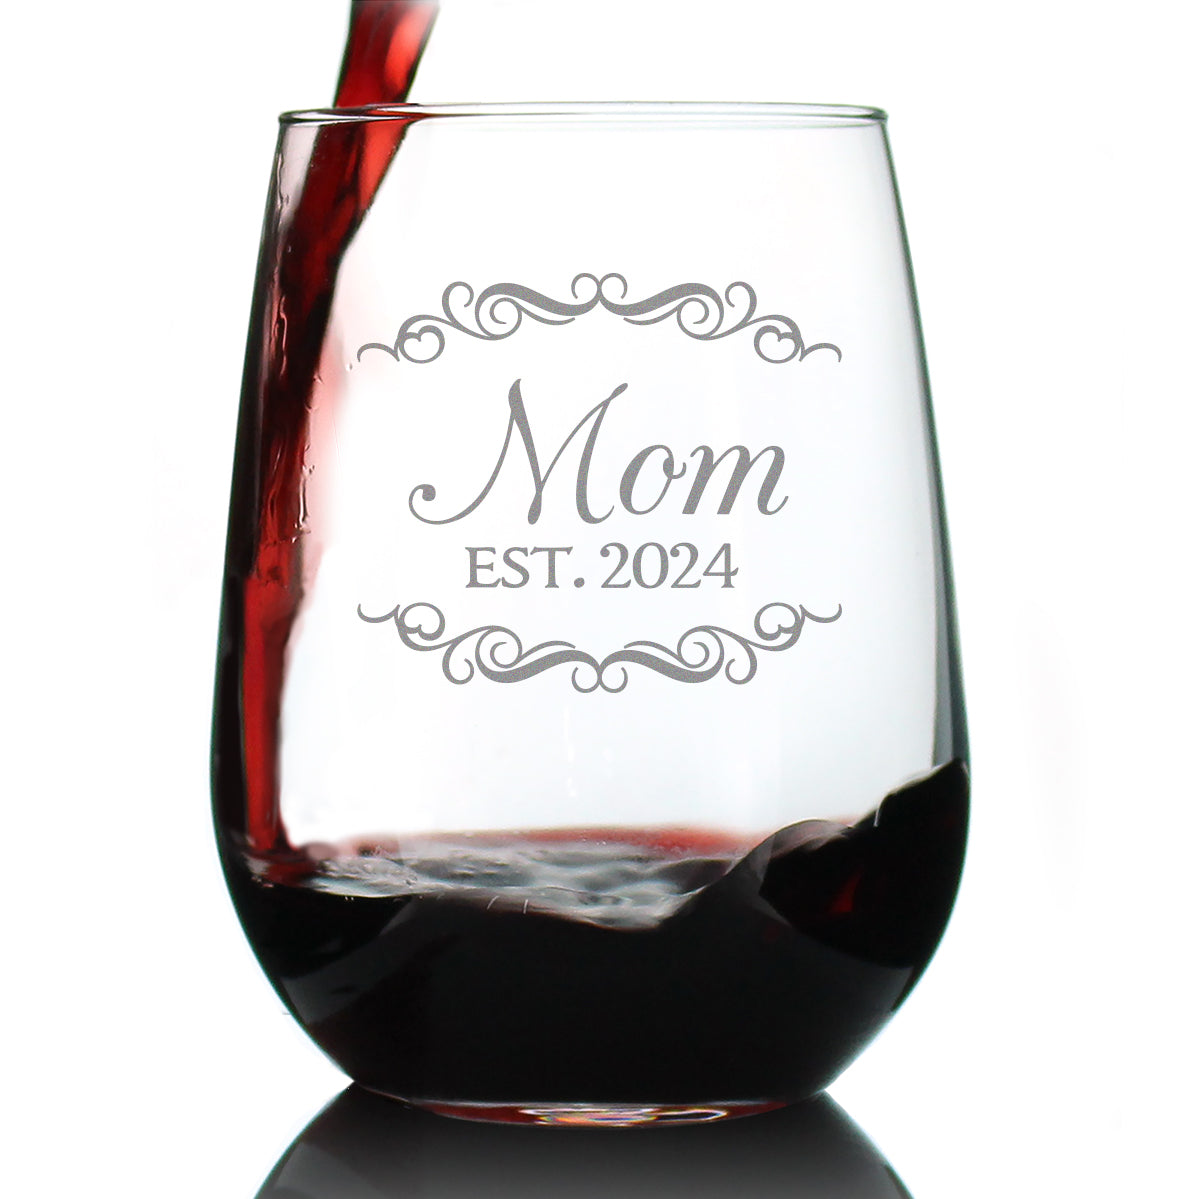 Mom Est 2024 - New Mother Stemless Wine Glass Gift for First Time Parents - Decorative 17 Oz Large Glasses